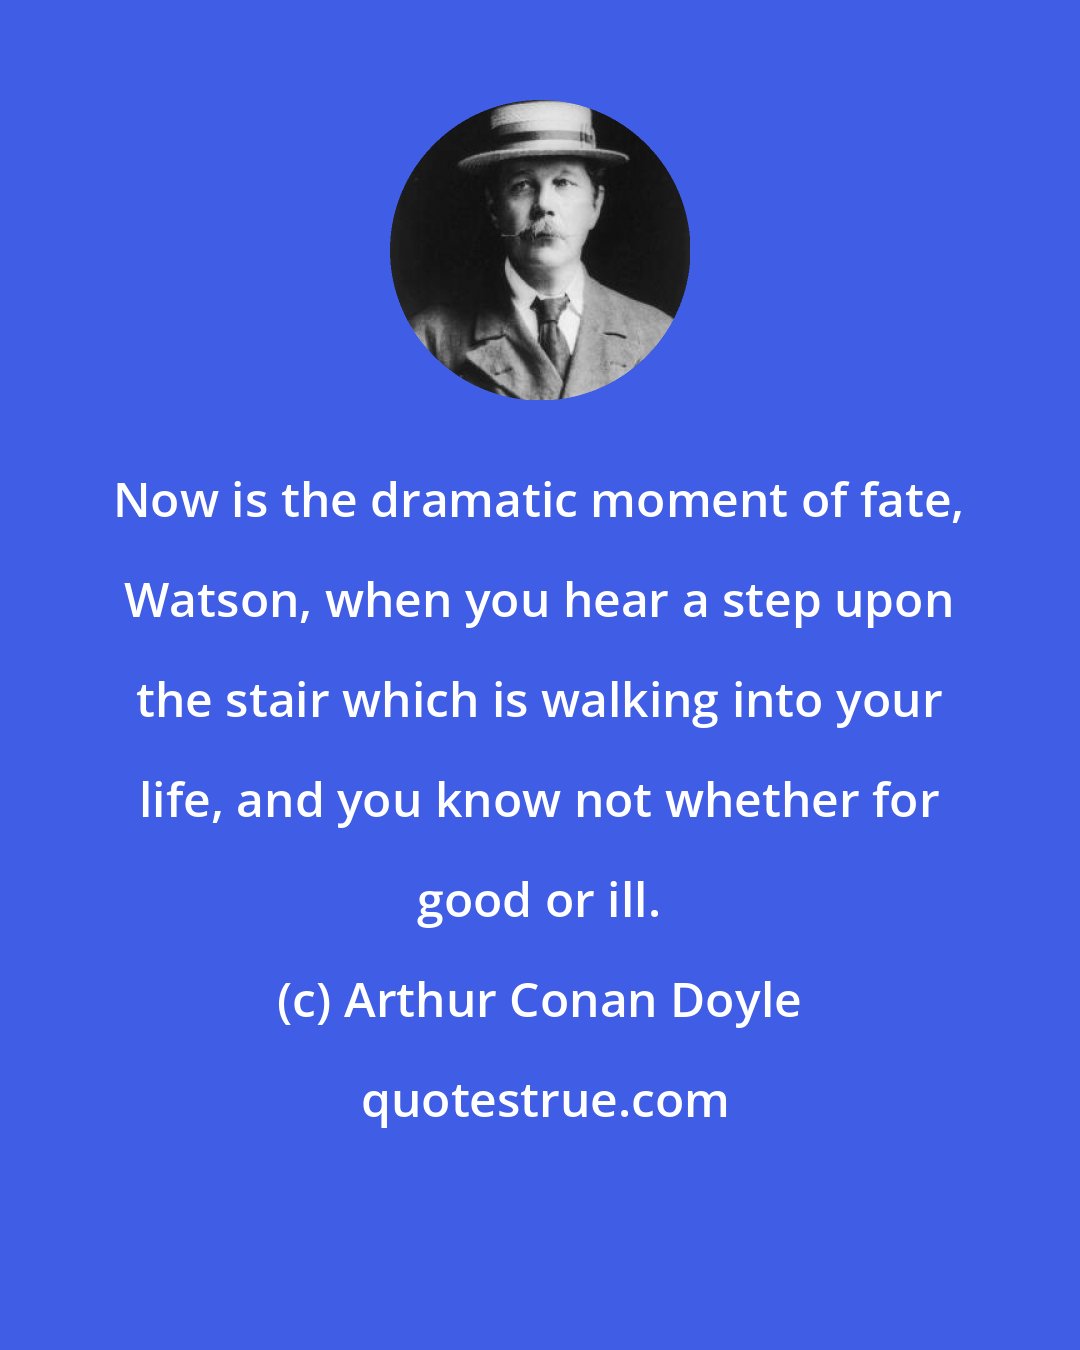 Arthur Conan Doyle: Now is the dramatic moment of fate, Watson, when you hear a step upon the stair which is walking into your life, and you know not whether for good or ill.